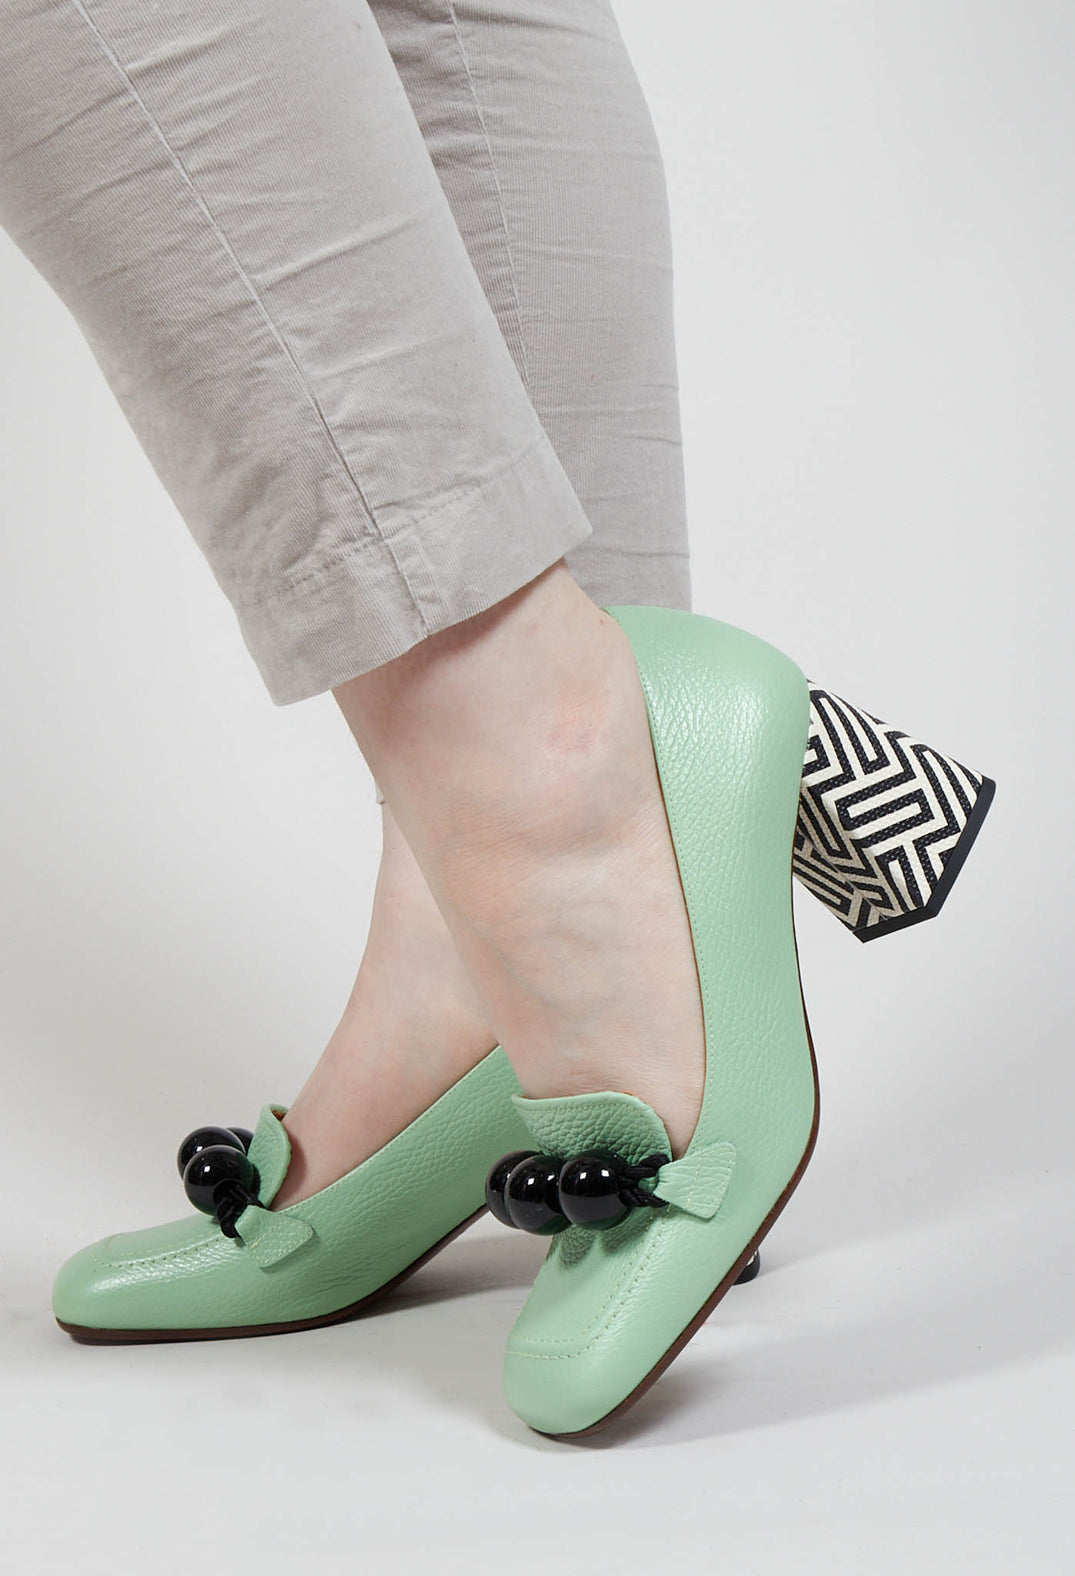 Suleiko Heel in Mint Black and White